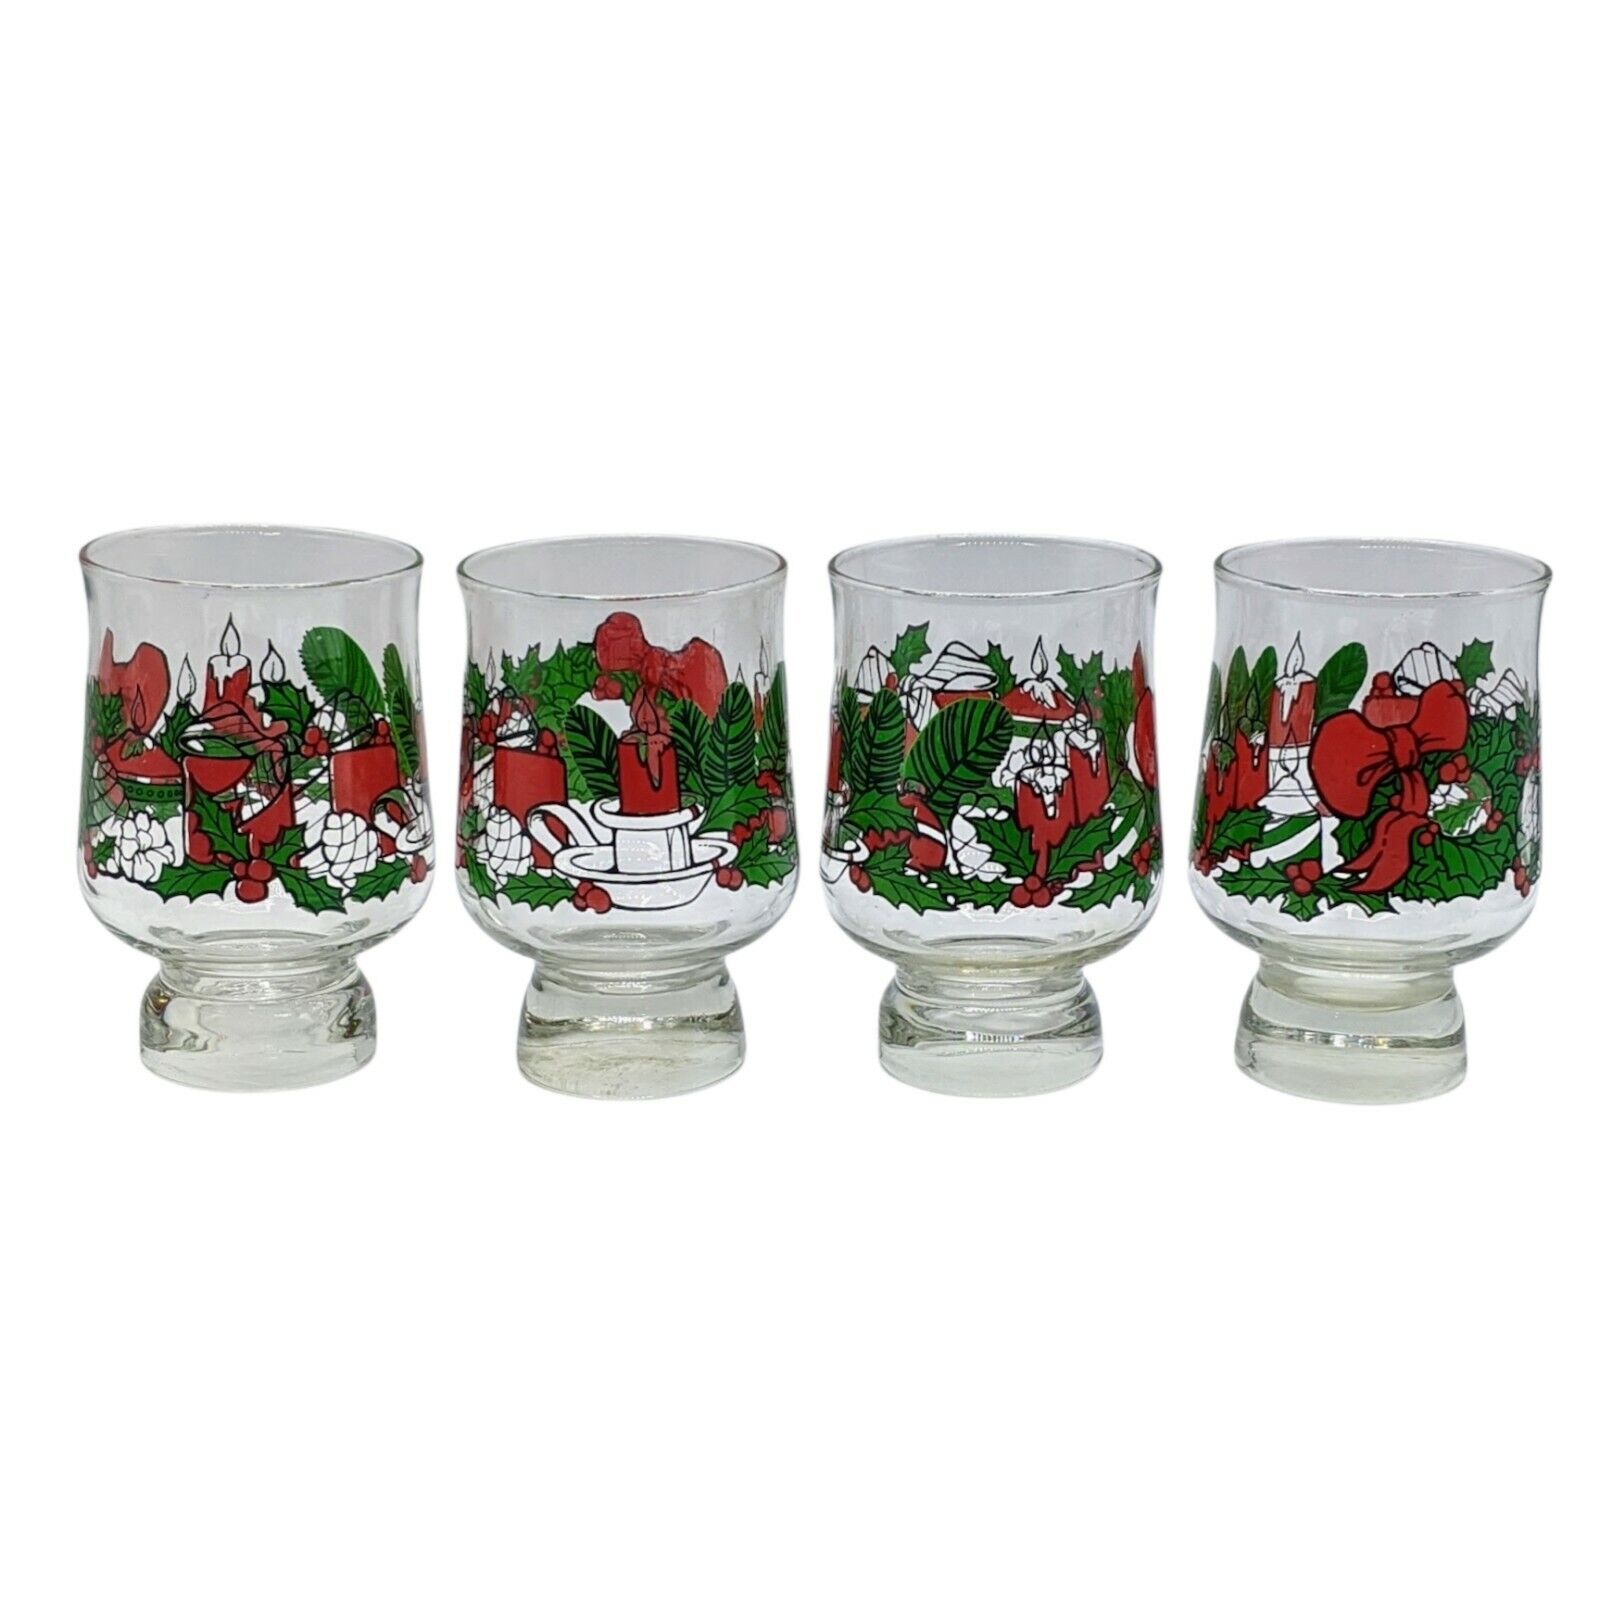 Vintage Pedestal Christmas Holly Drinking Glasses Set of 4 Candles Wreathes